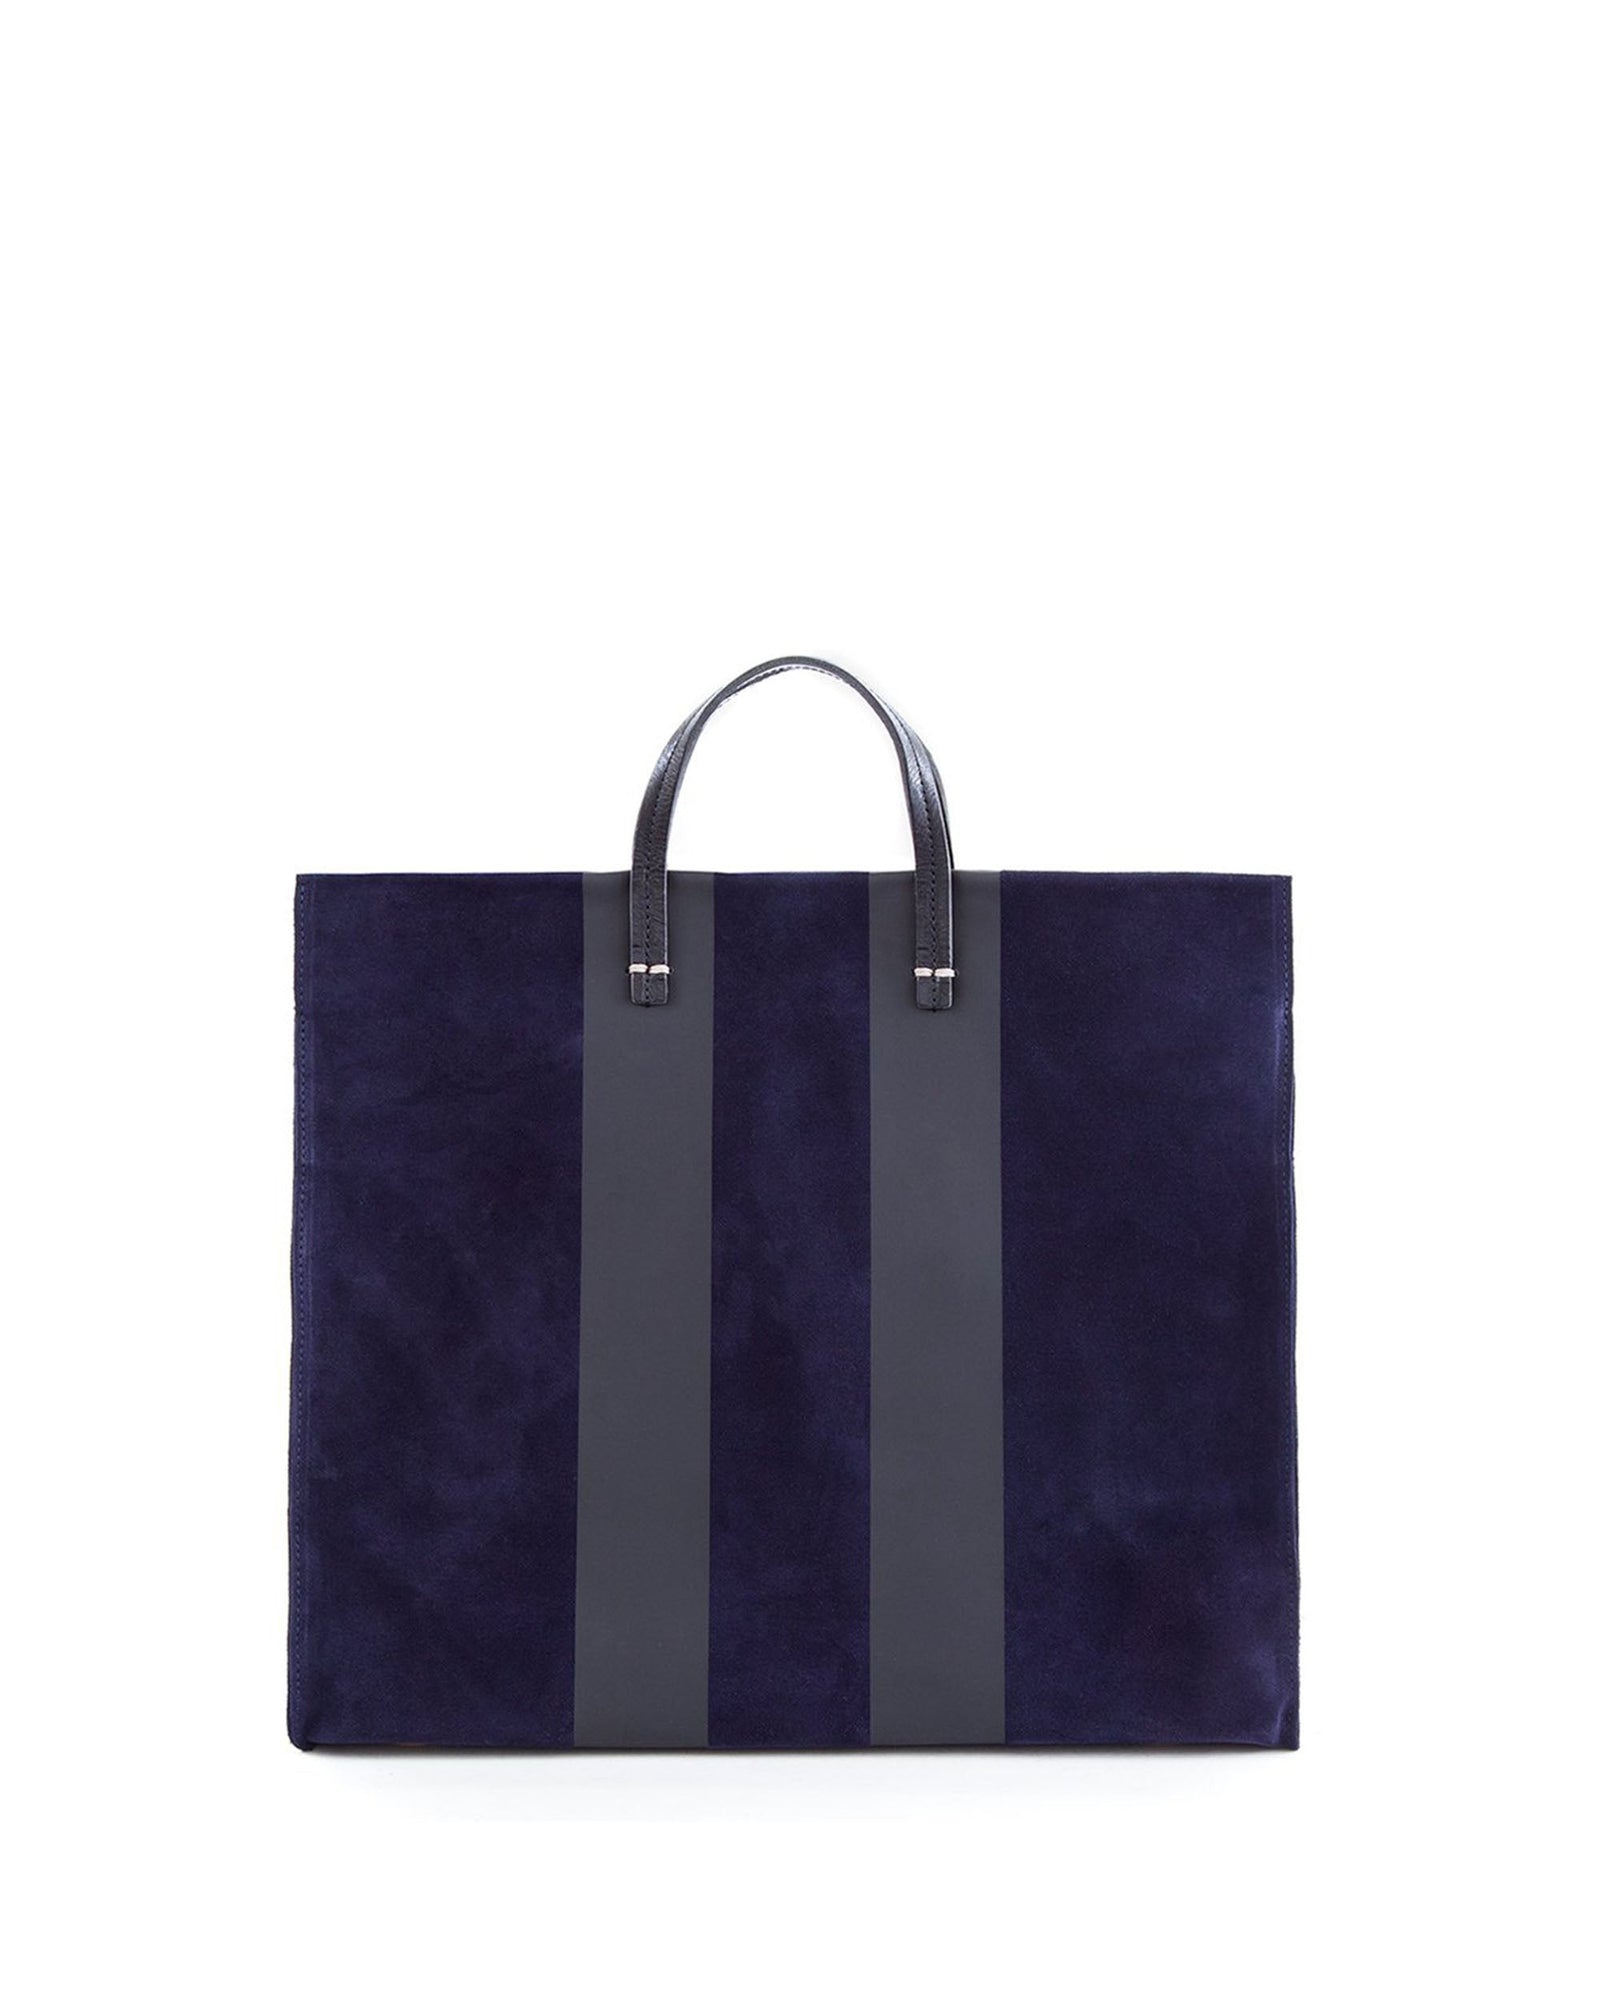 Simple Tote in Navy Suede with Racing Stripes - Front